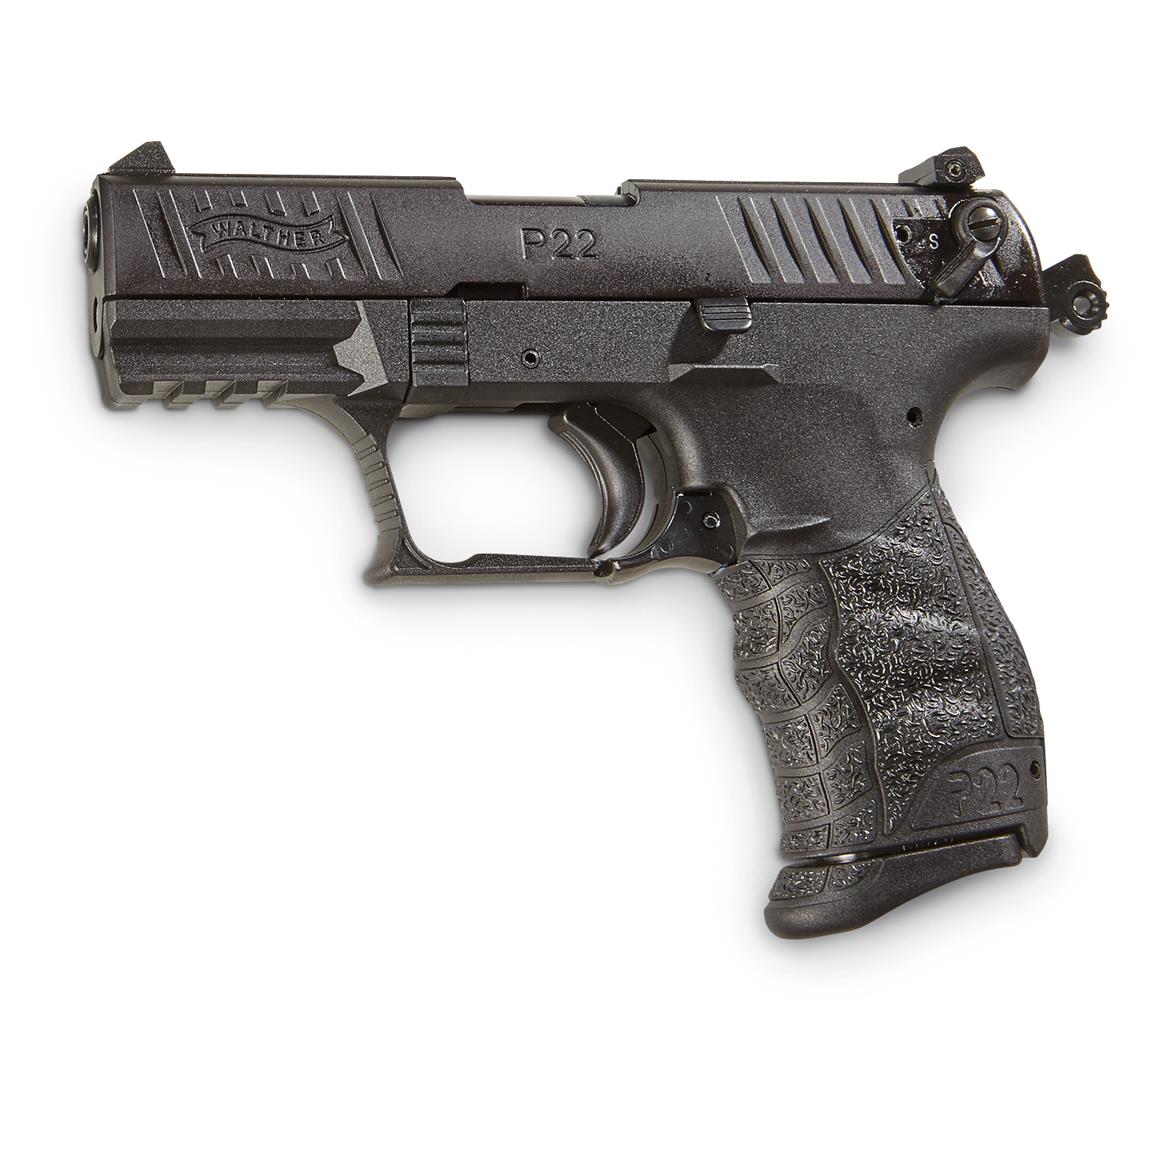 walther-p22-semi-automatic-22lr-5120300-723364200274-641317